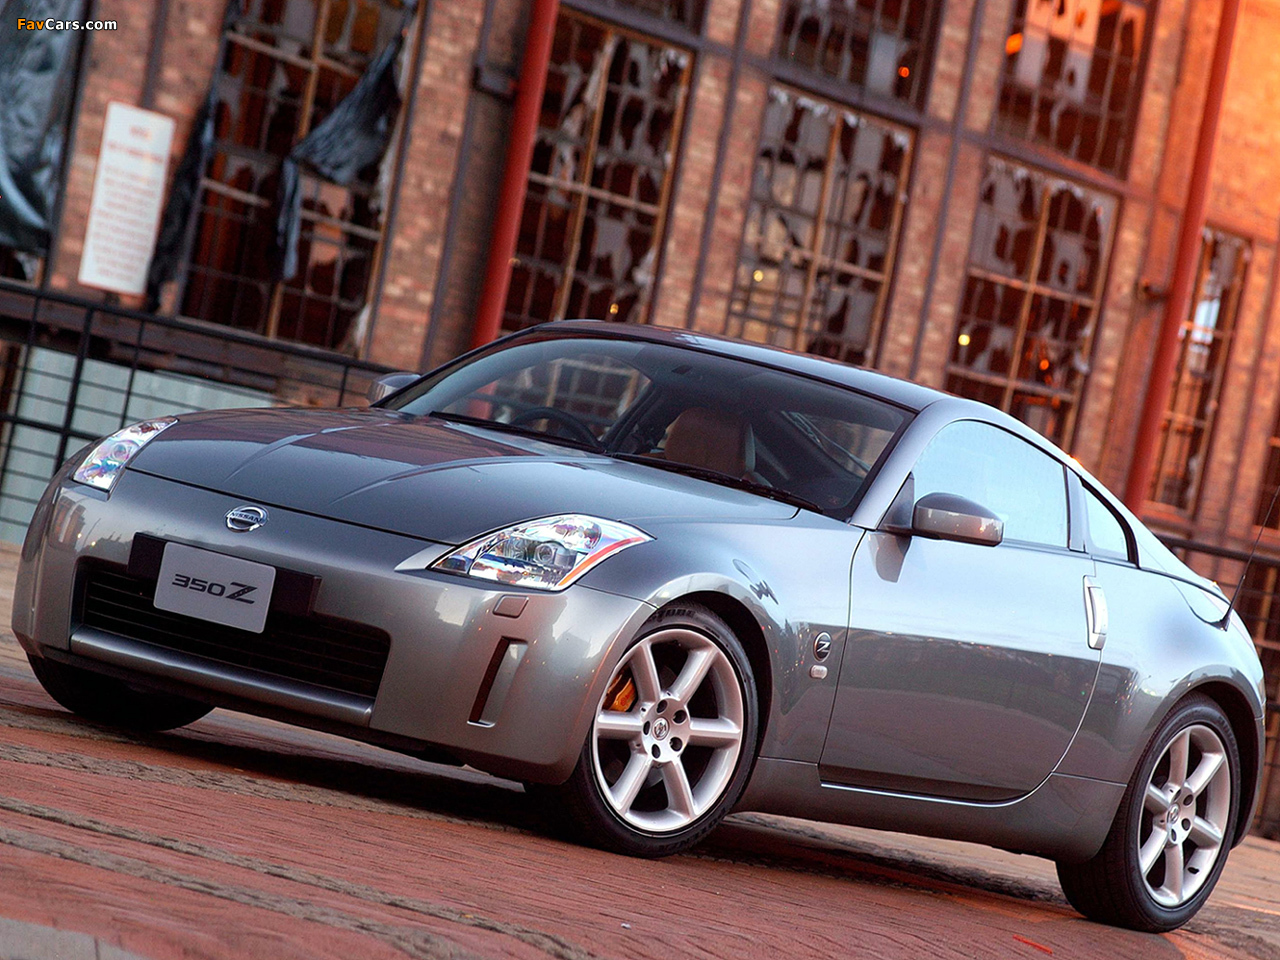 Nissan 350Z wallpapers. 